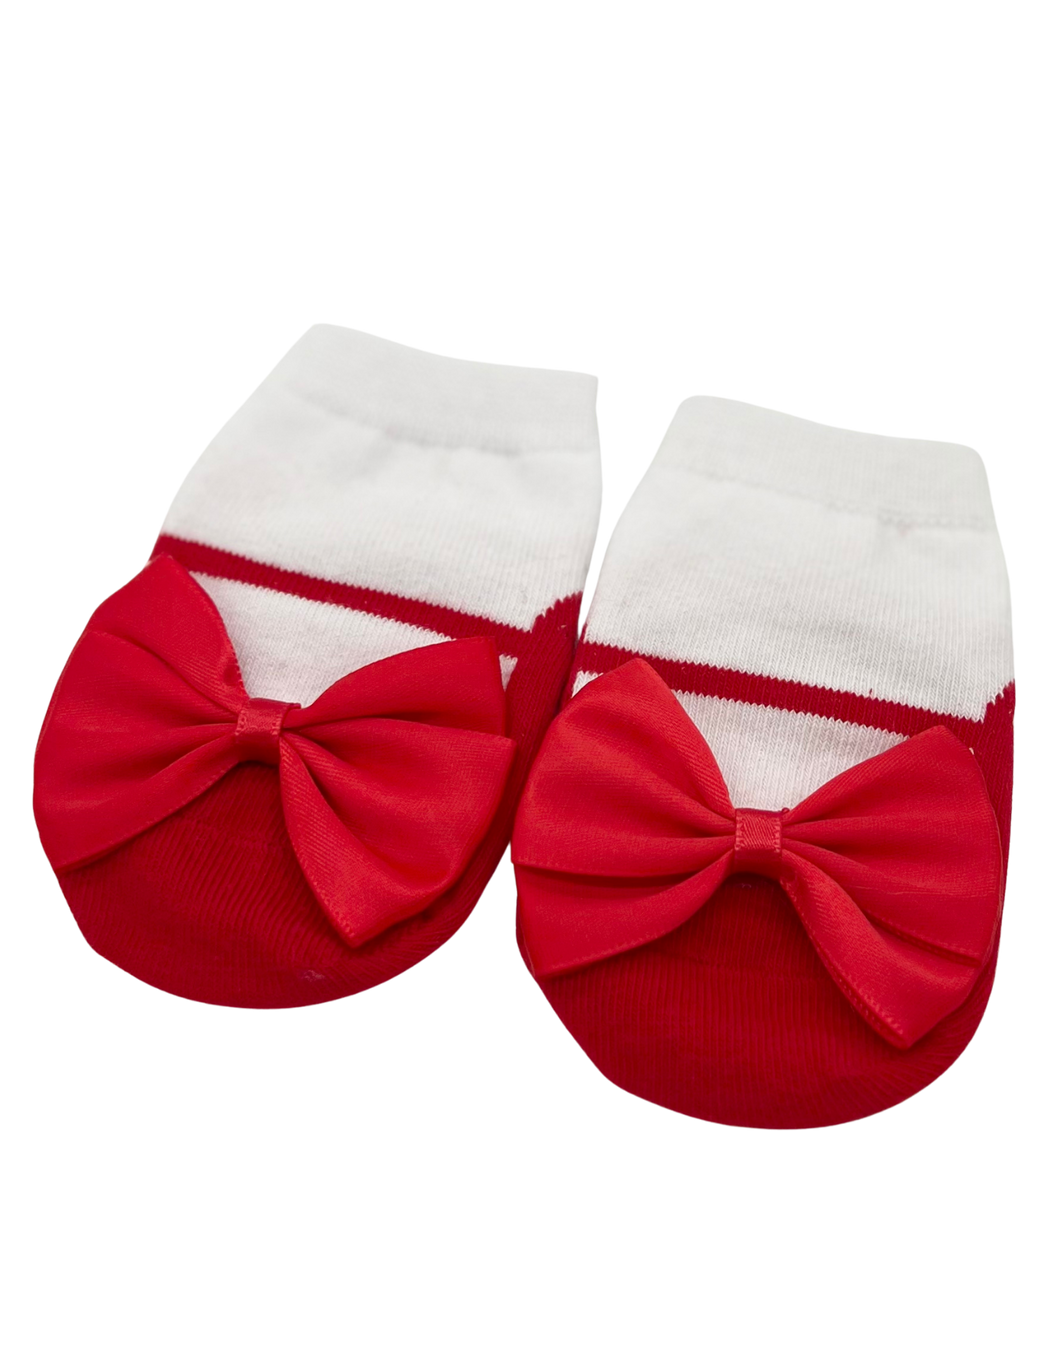 Baby Booties- Red Mary Jane Bow Socks - CovetedThings